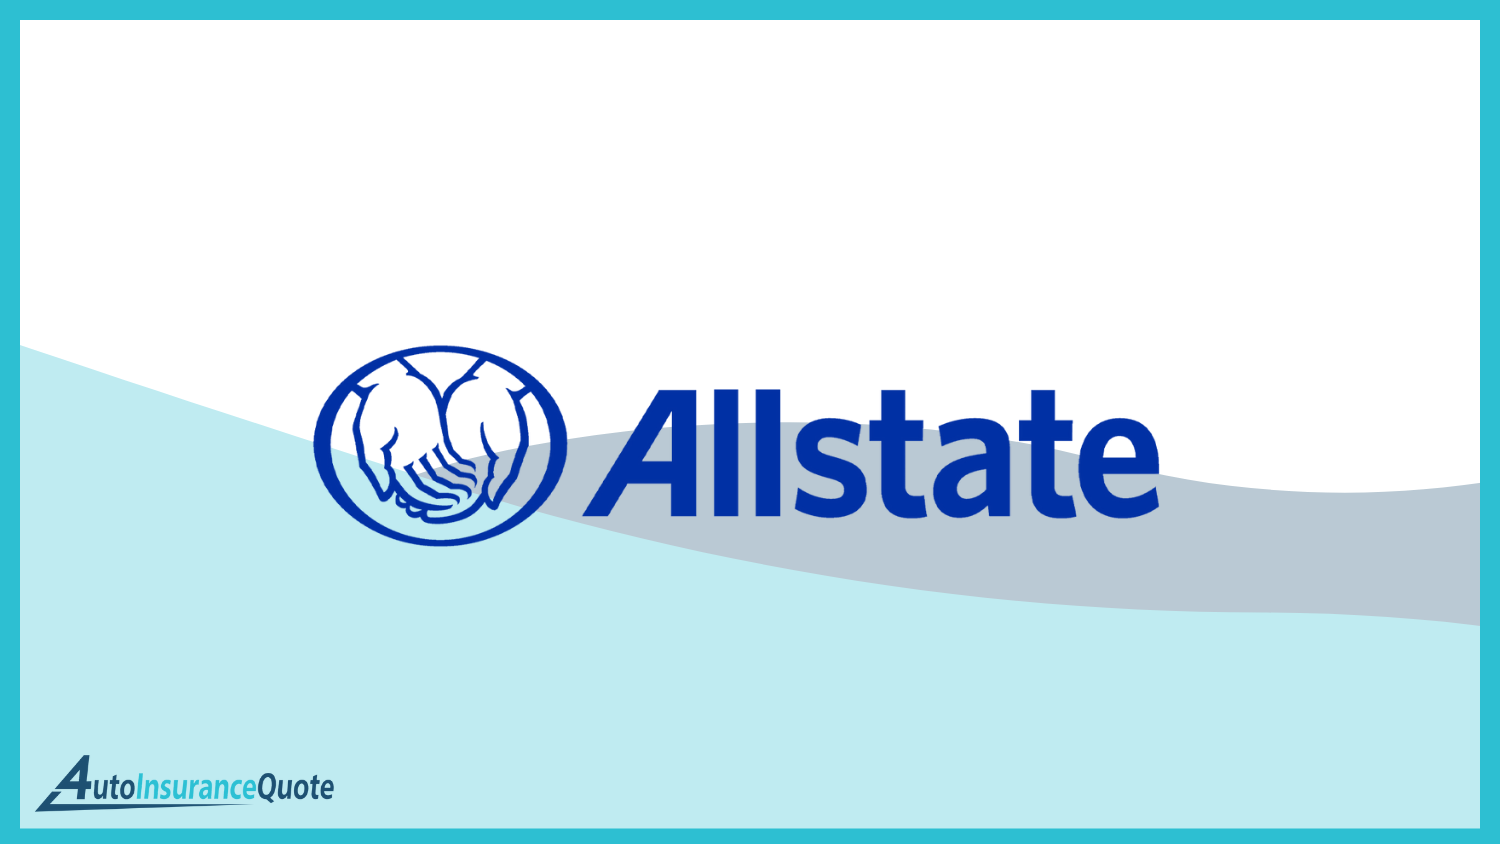 Allstate: Best Auto Insurance for Government Employees